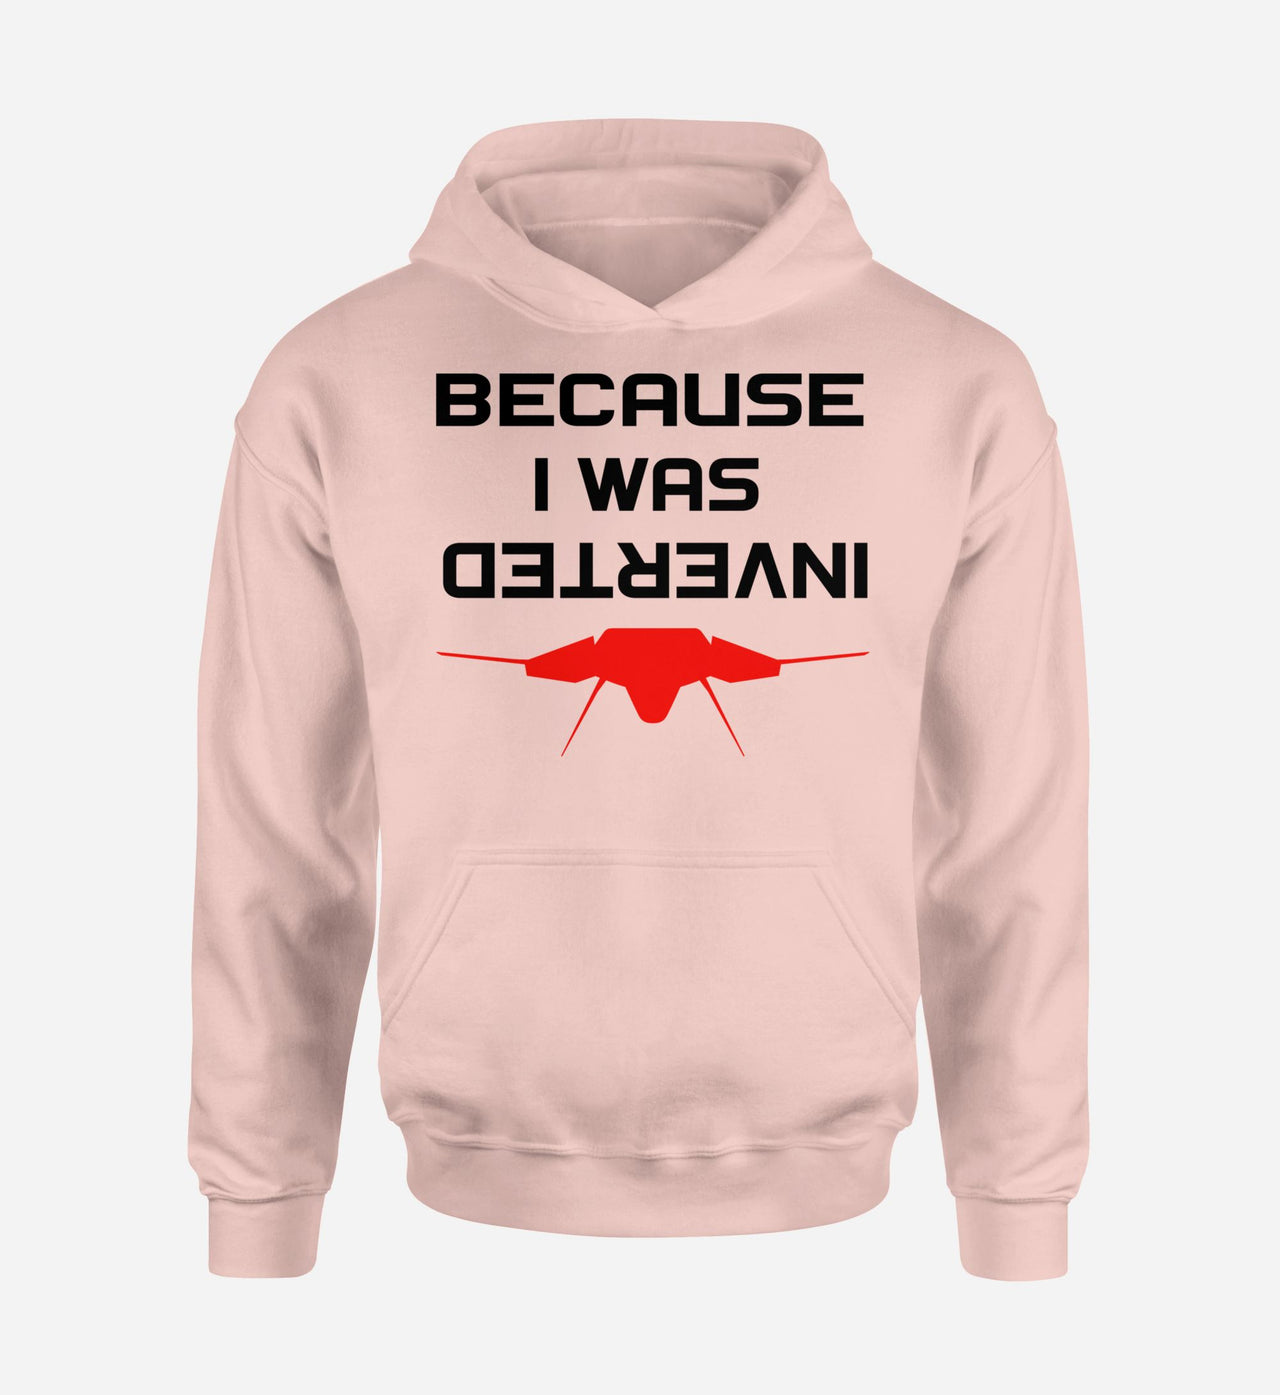 Because I was Inverted Designed Hoodies